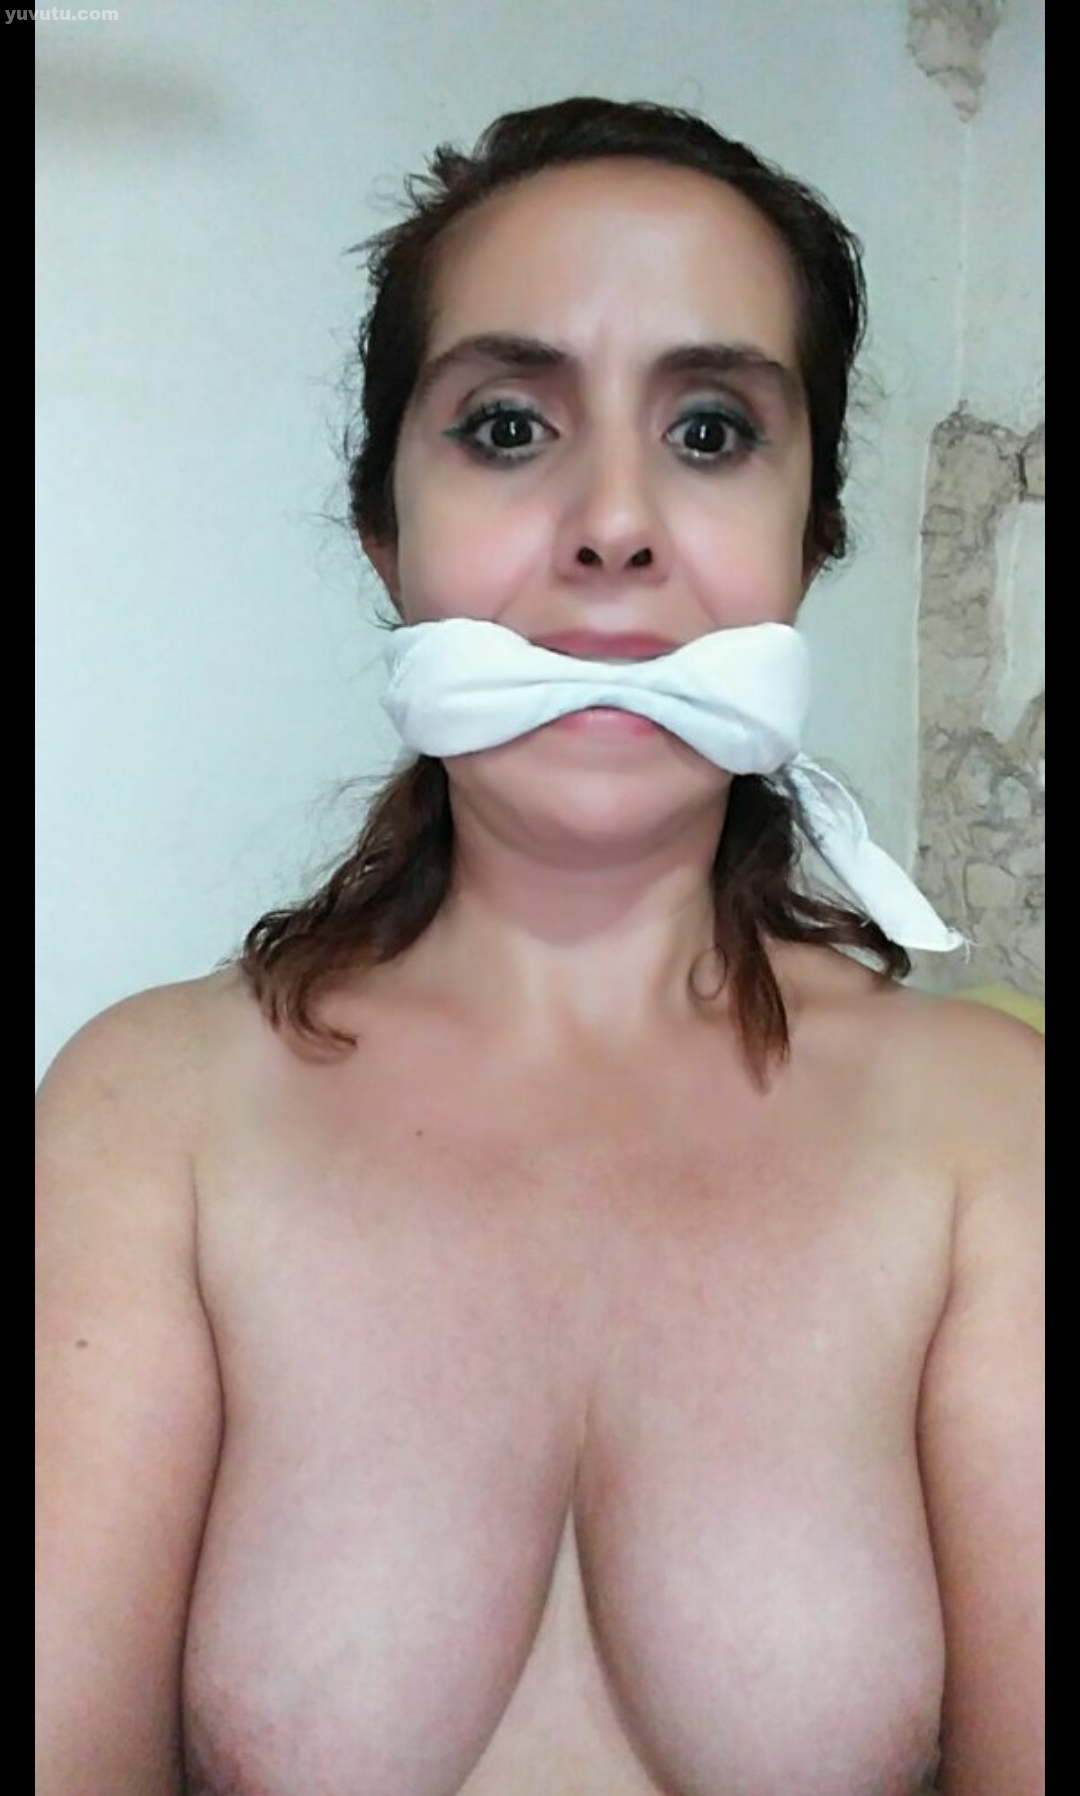 Homemade Mexican Porn Movies - Mexican slut chained and gagged On Yuvutu Homemade Amateur Porn Movies And  XXX Sex Videos